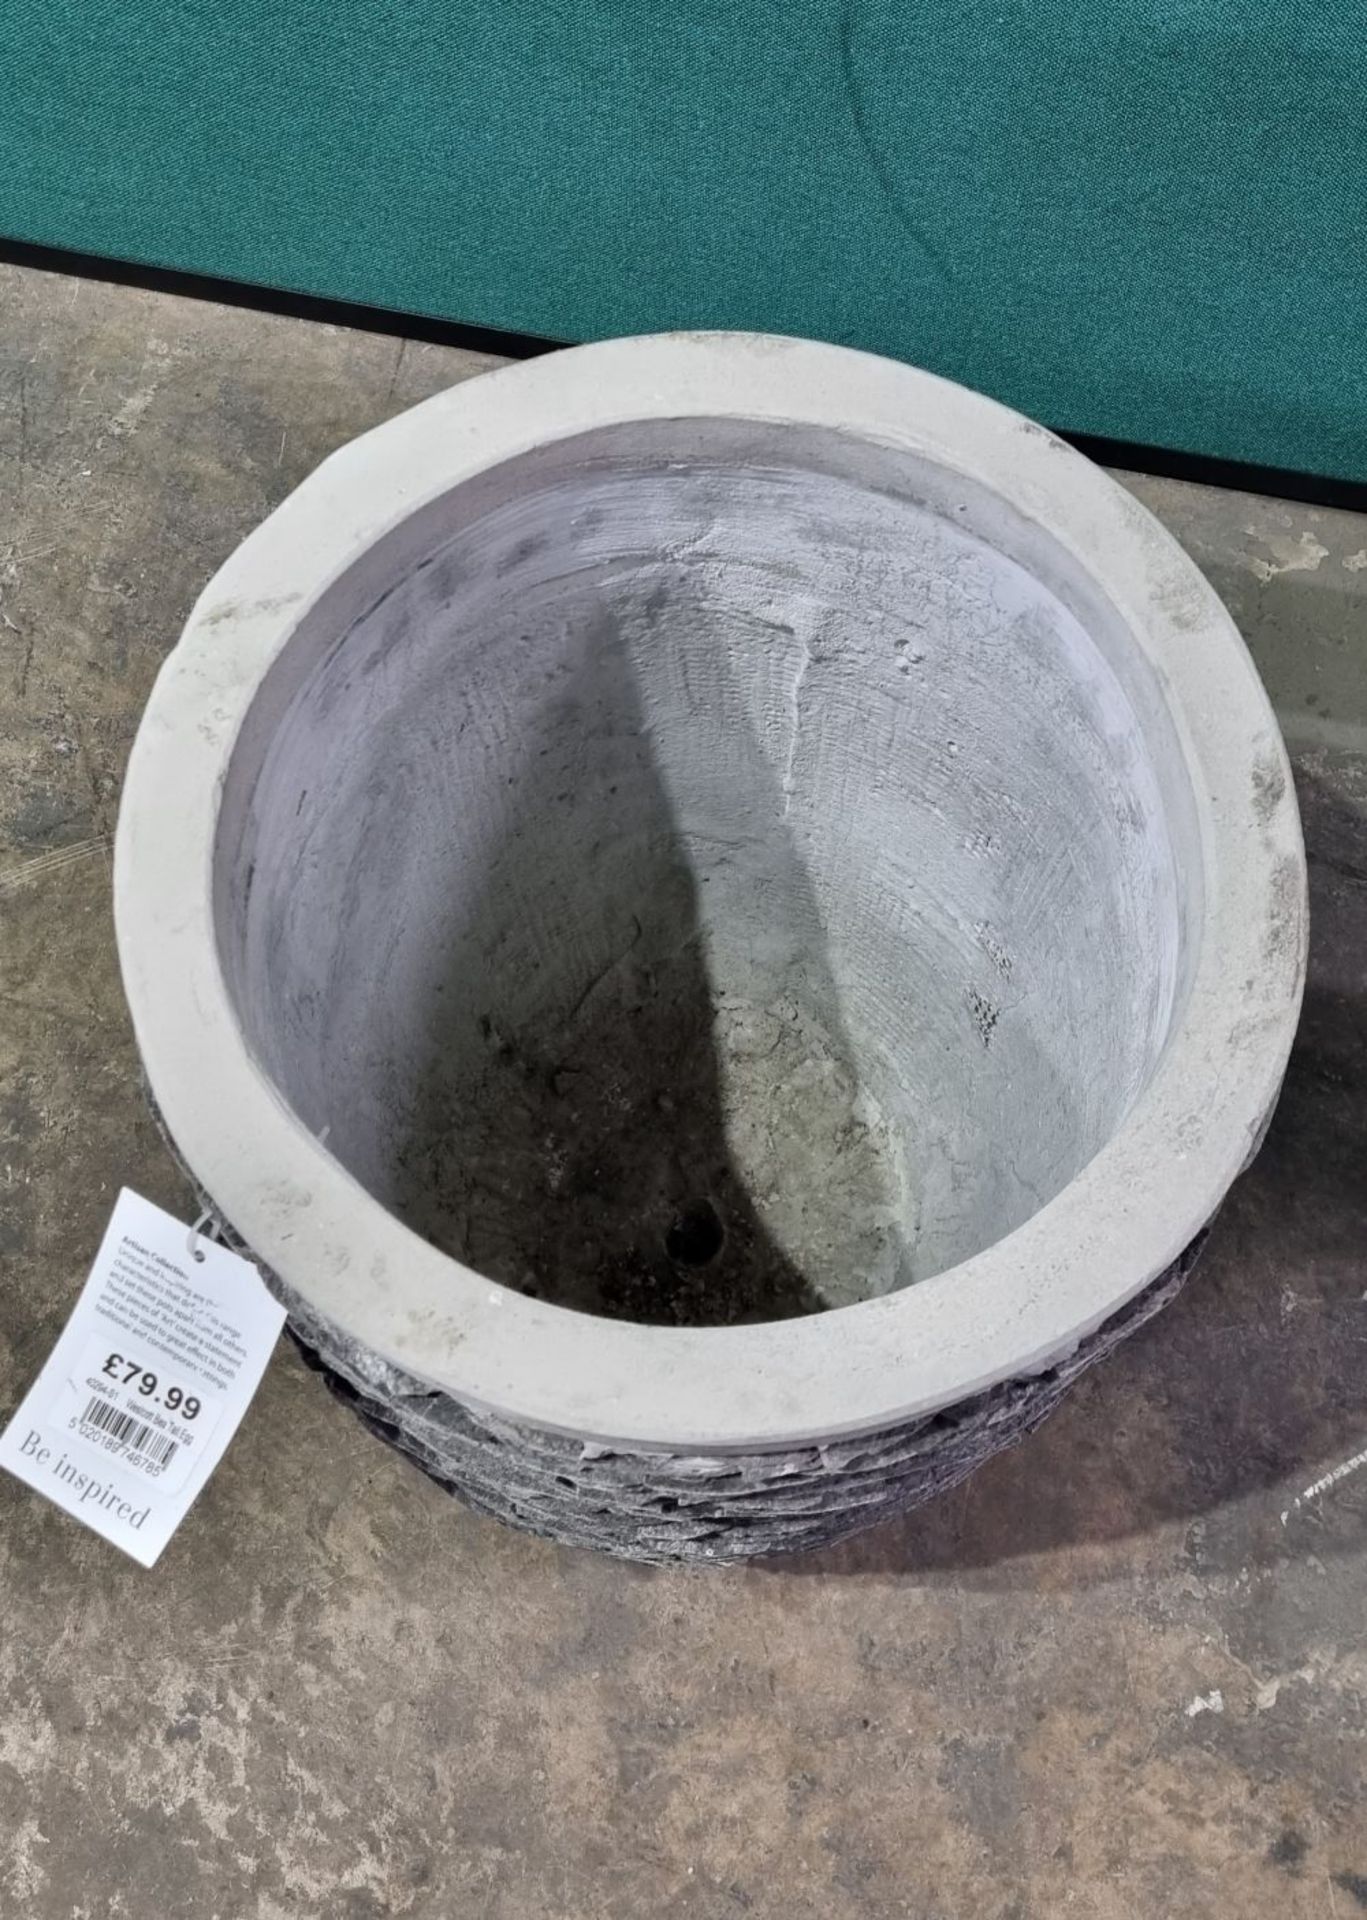 Mims Artisan Collection Westcott BEA 40294-S1 Tall Egg Slate Planter | 550mm x 350mm | RRP £79.99 - Image 4 of 5